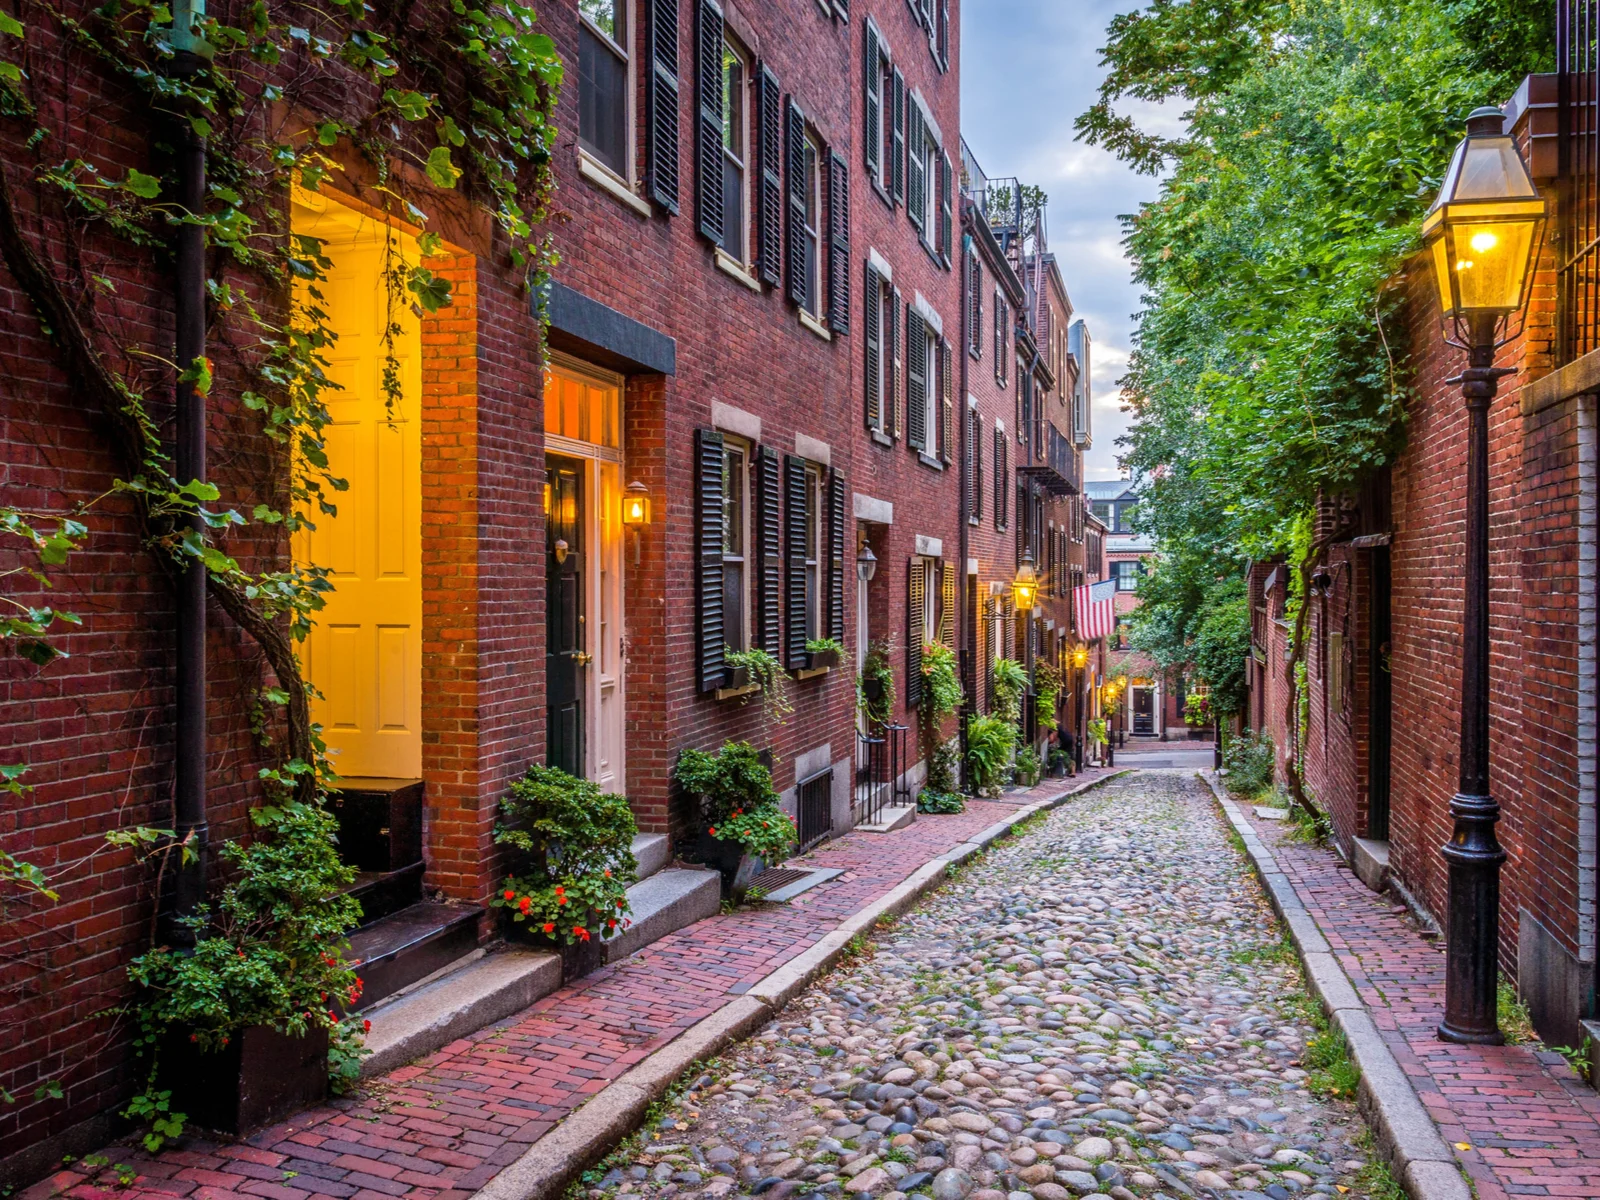 Acorn street pictured in Summer for a piece titled Where to Stay in Boston